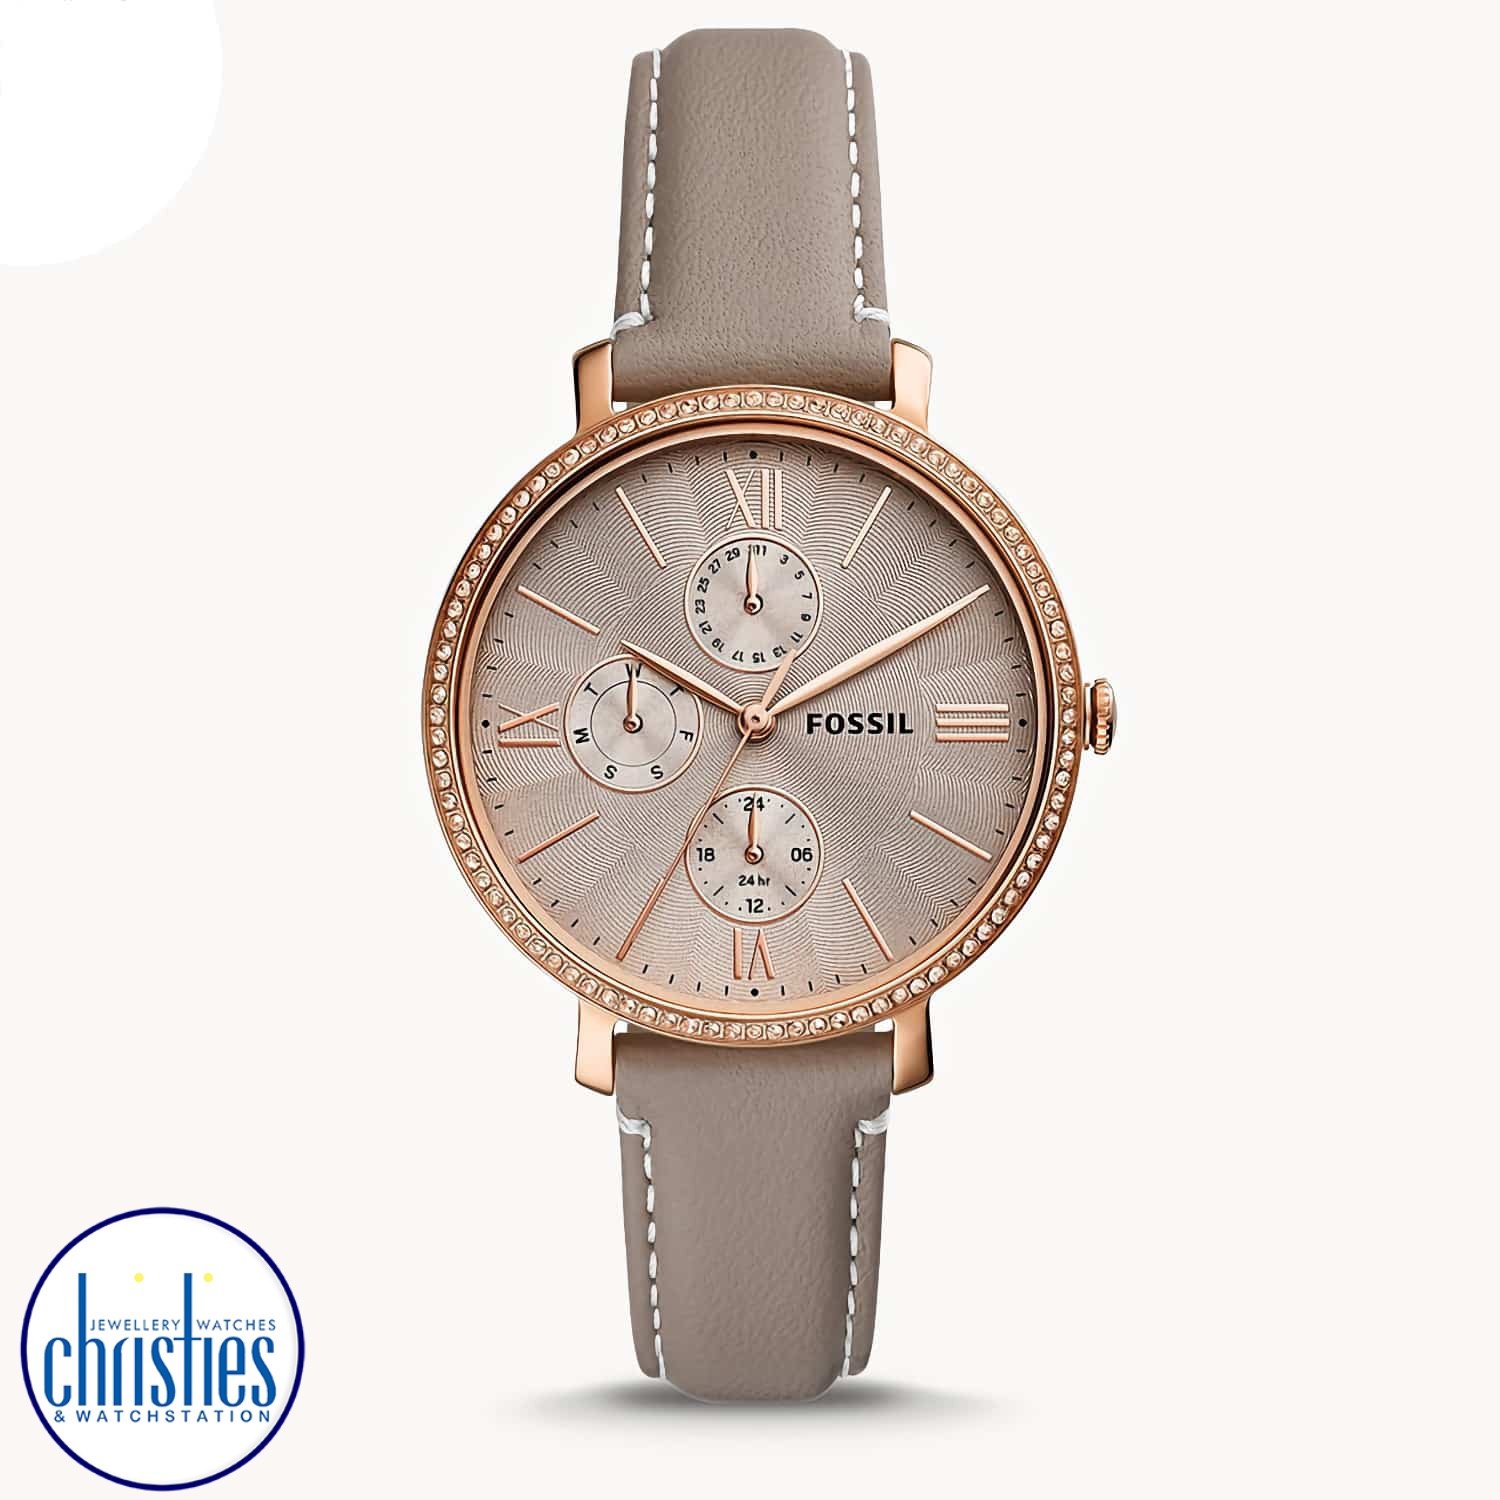 ES5097 Fossil Jacqueline Multifunction Grey Leather Watch. ES5097 Fossil Jacqueline Multifunction Grey Leather Watch Afterpay - Split your purchase into 4 instalments - Pay for your purchase over 4 instalments, due every two weeks. You’ll pay your first i